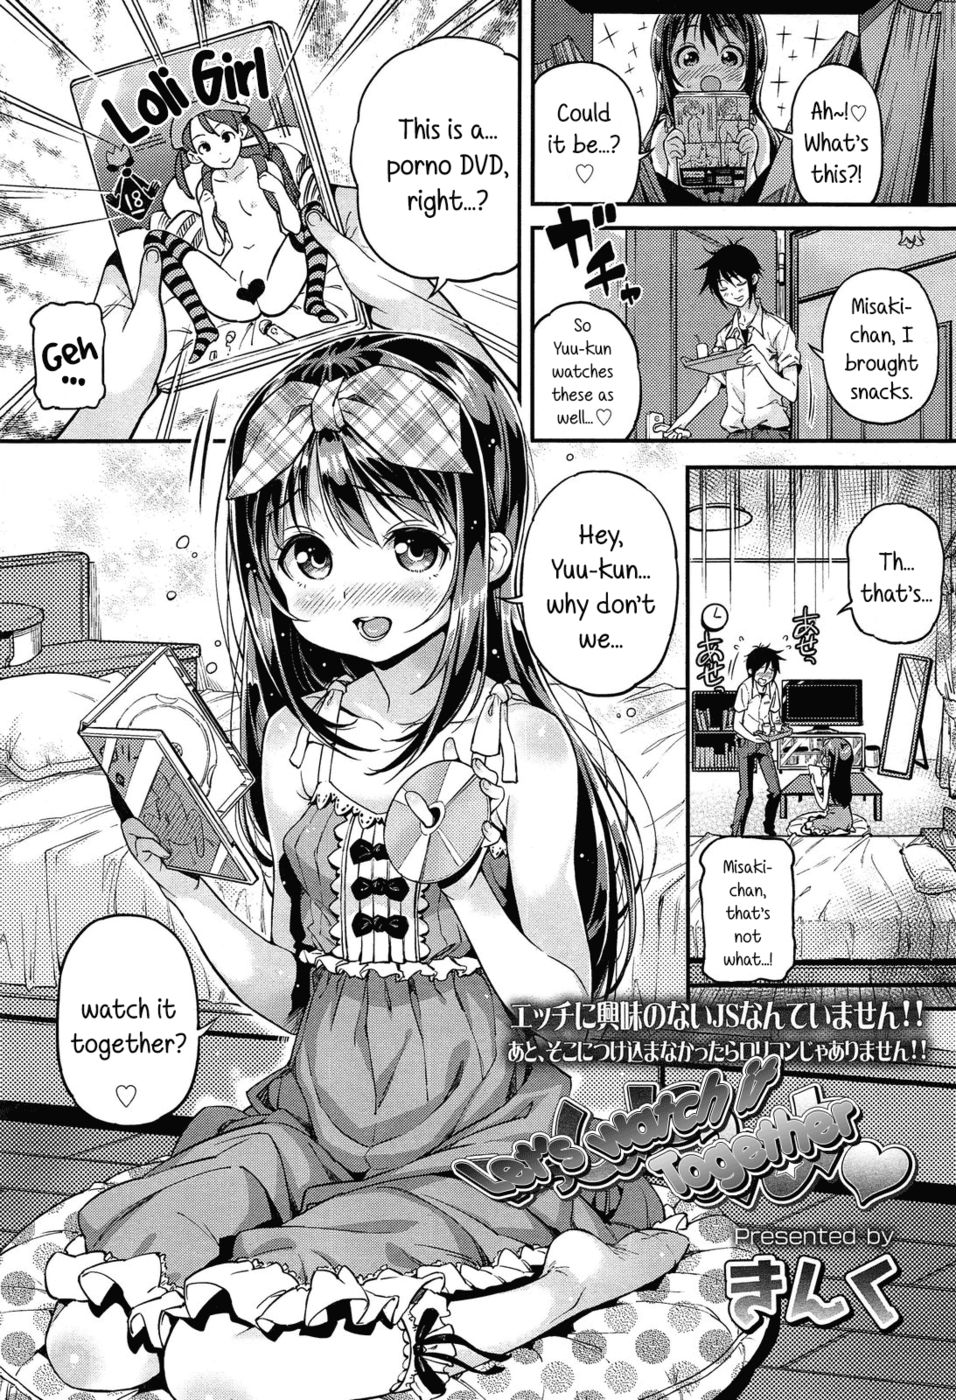 Hentai Manga Comic-Let's watch it together!-Read-1